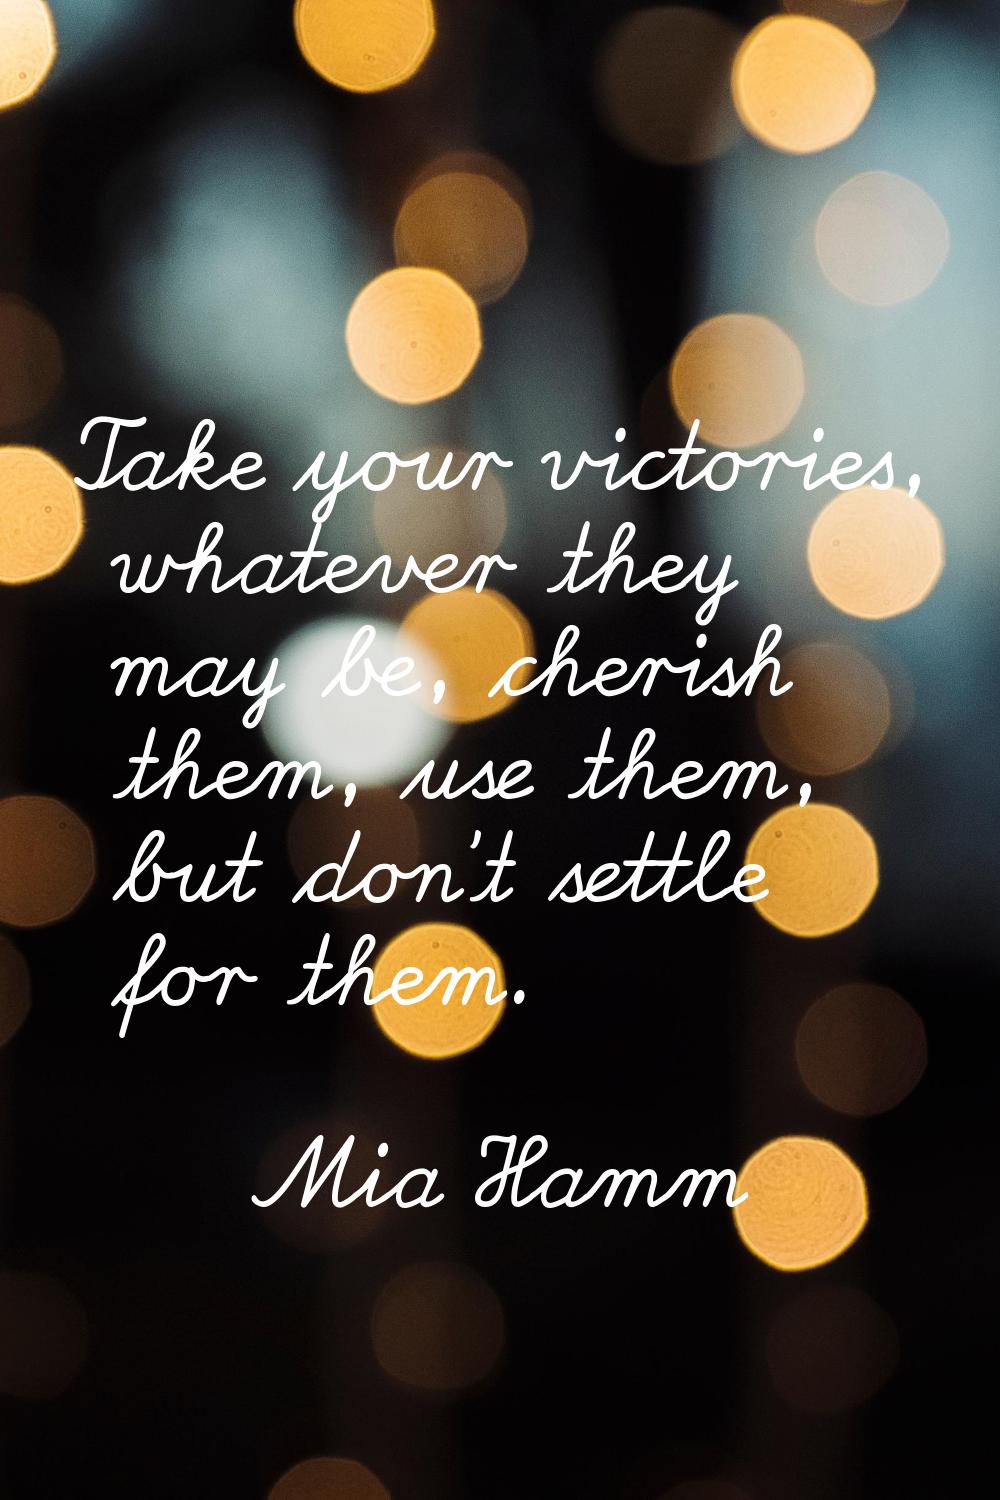 Take your victories, whatever they may be, cherish them, use them, but don't settle for them.